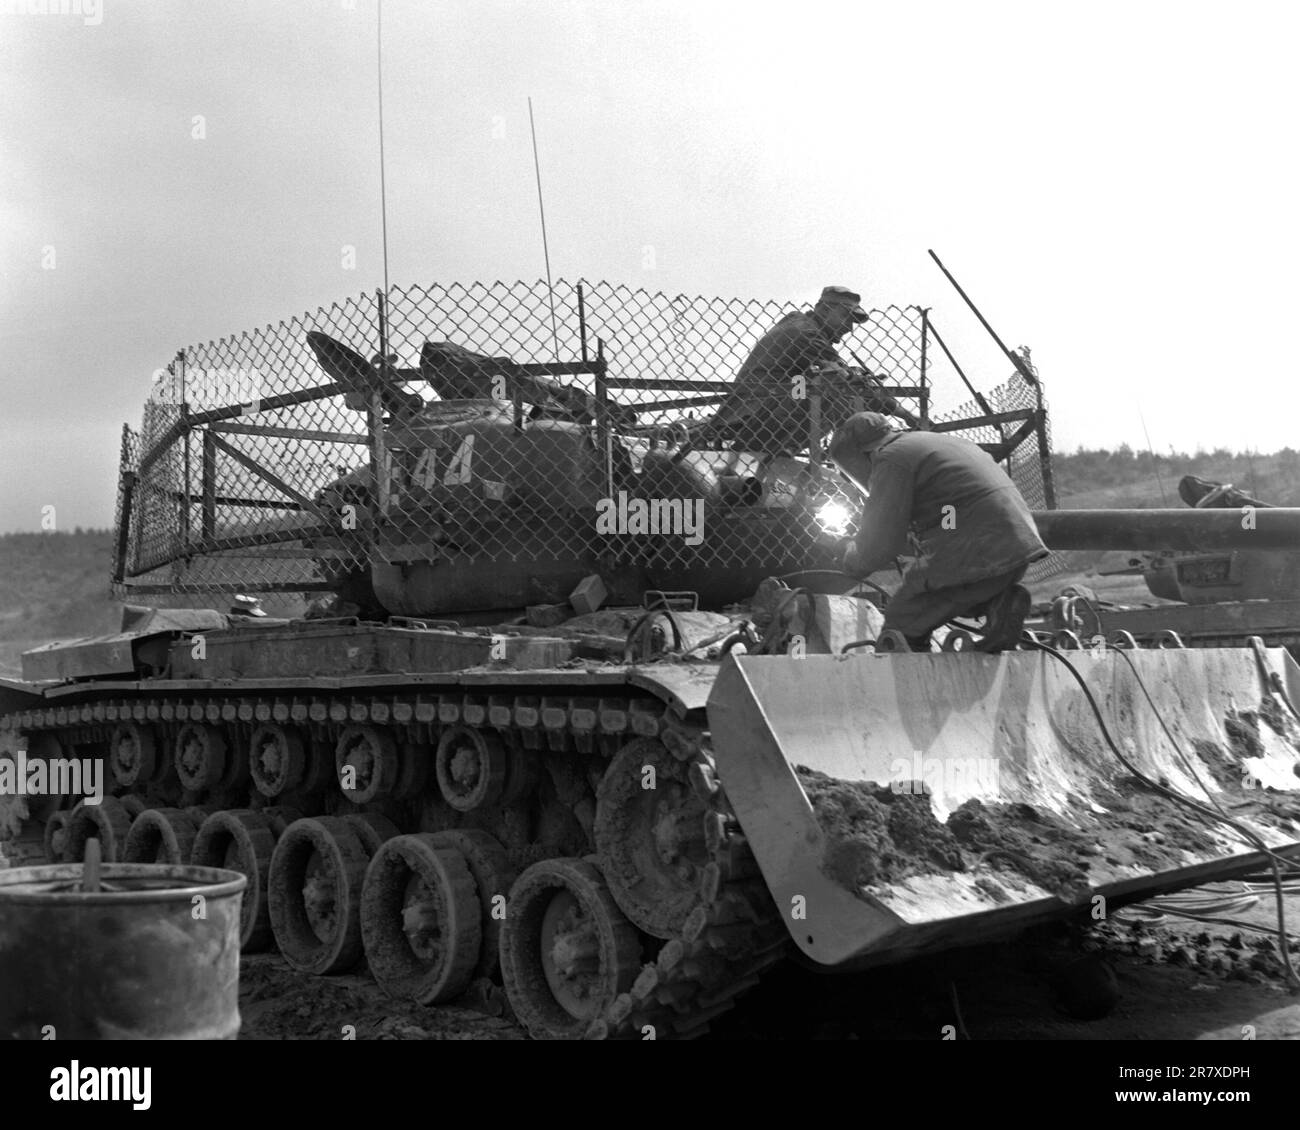 An M-46 Patton tank dozer of Dog Company, 1st Tank Battalion, with a wire fence cage around the turret, which was designed to explode 3.5 rockets the enemy is firing before they hit the tank.  The wire fence turns with the turret. Stock Photo